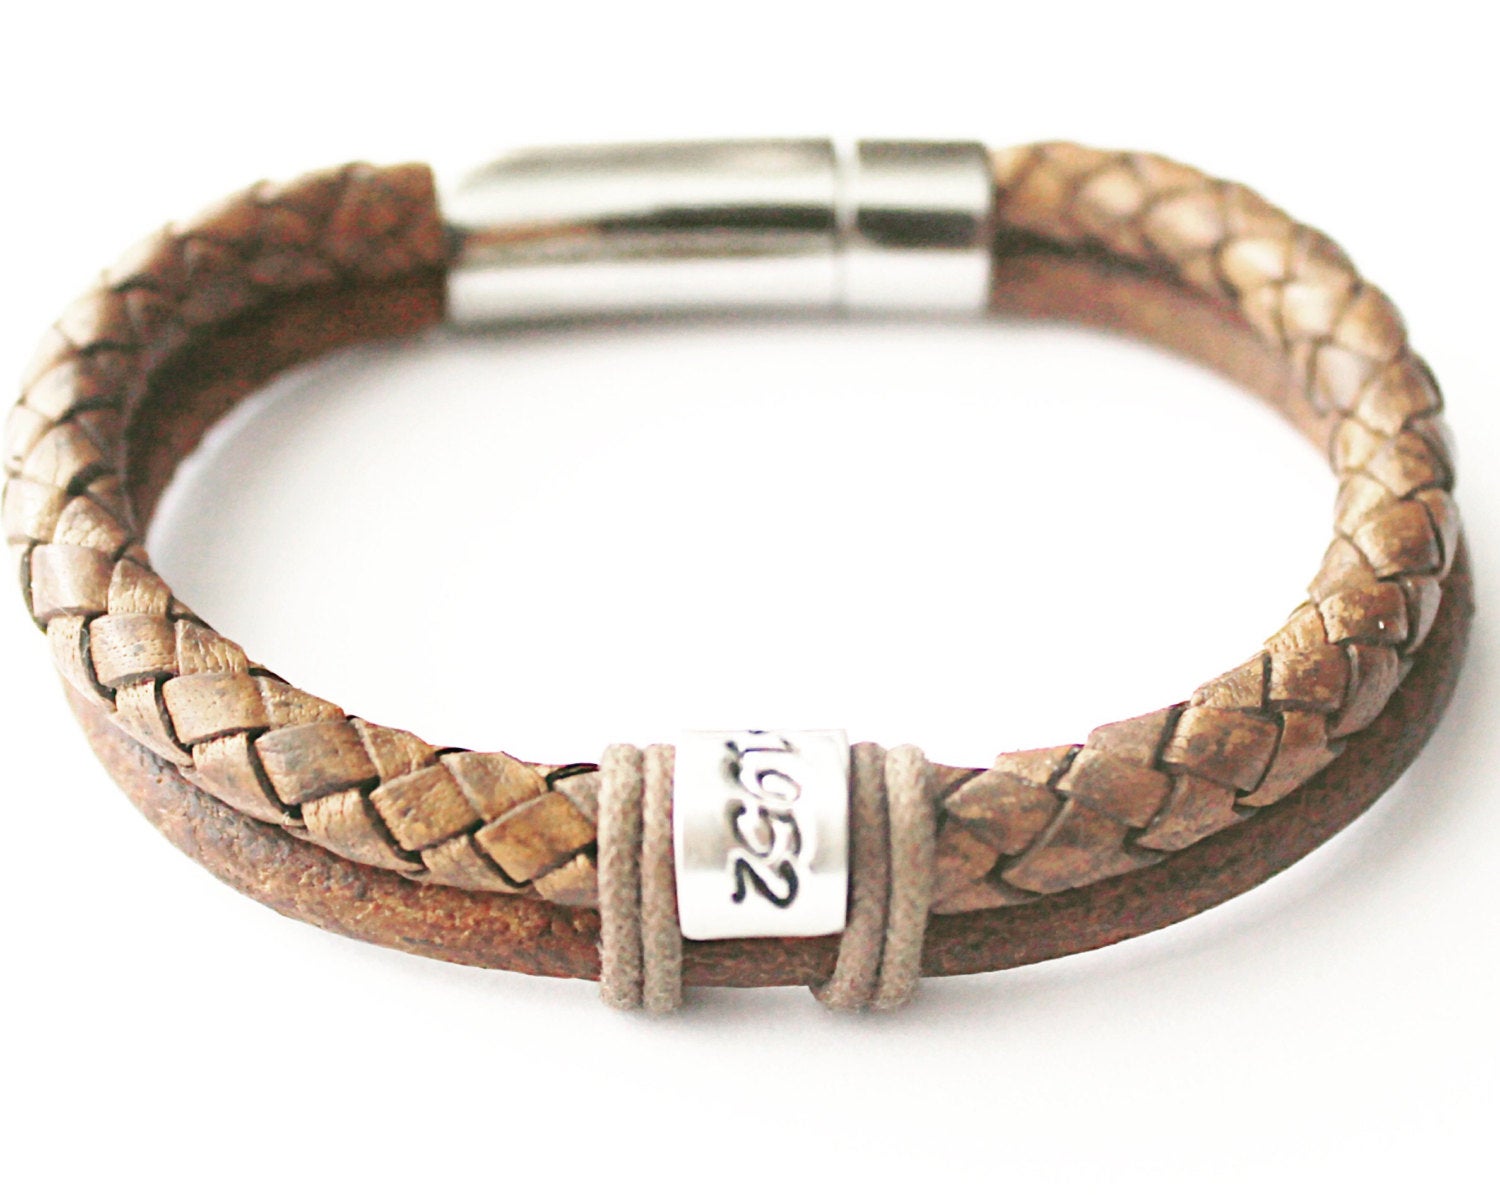 Mens Personalised Leather Bracelet, Jewellery for Dad, Christmas Gift for Him